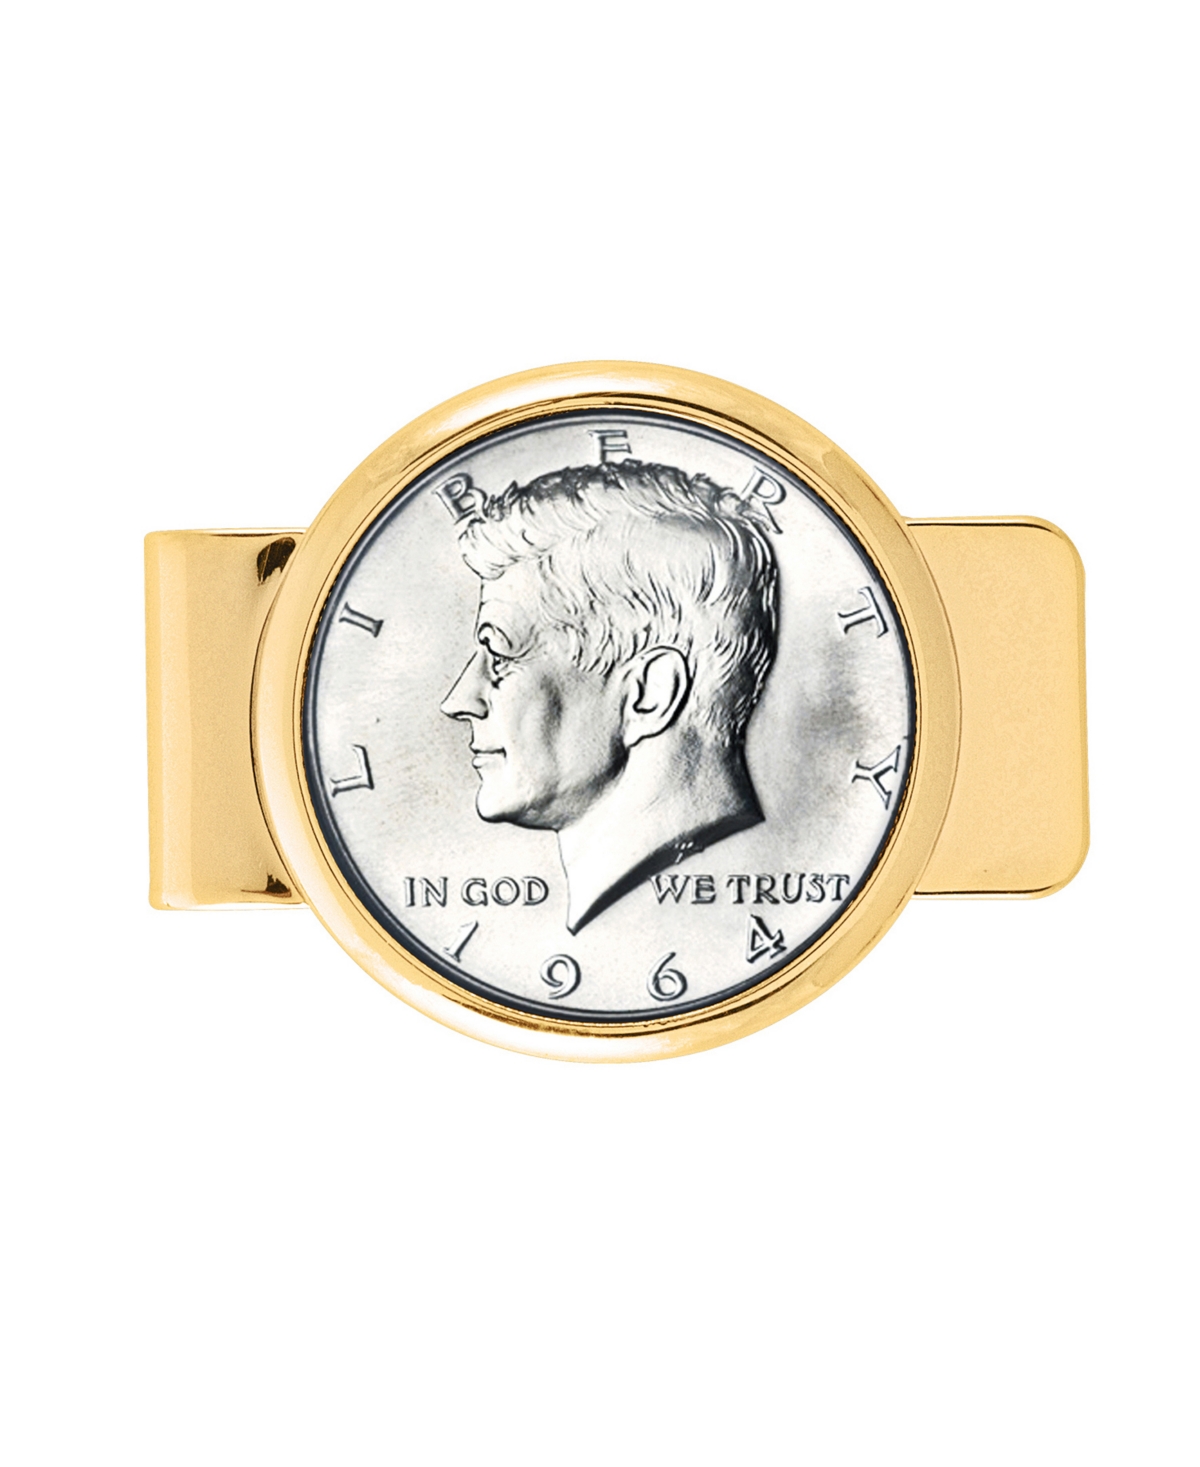 Men's American Coin Treasures 1964 First-Year-Of-Issue Silver Jfk Half Dollar Coin Money Clip - Gold